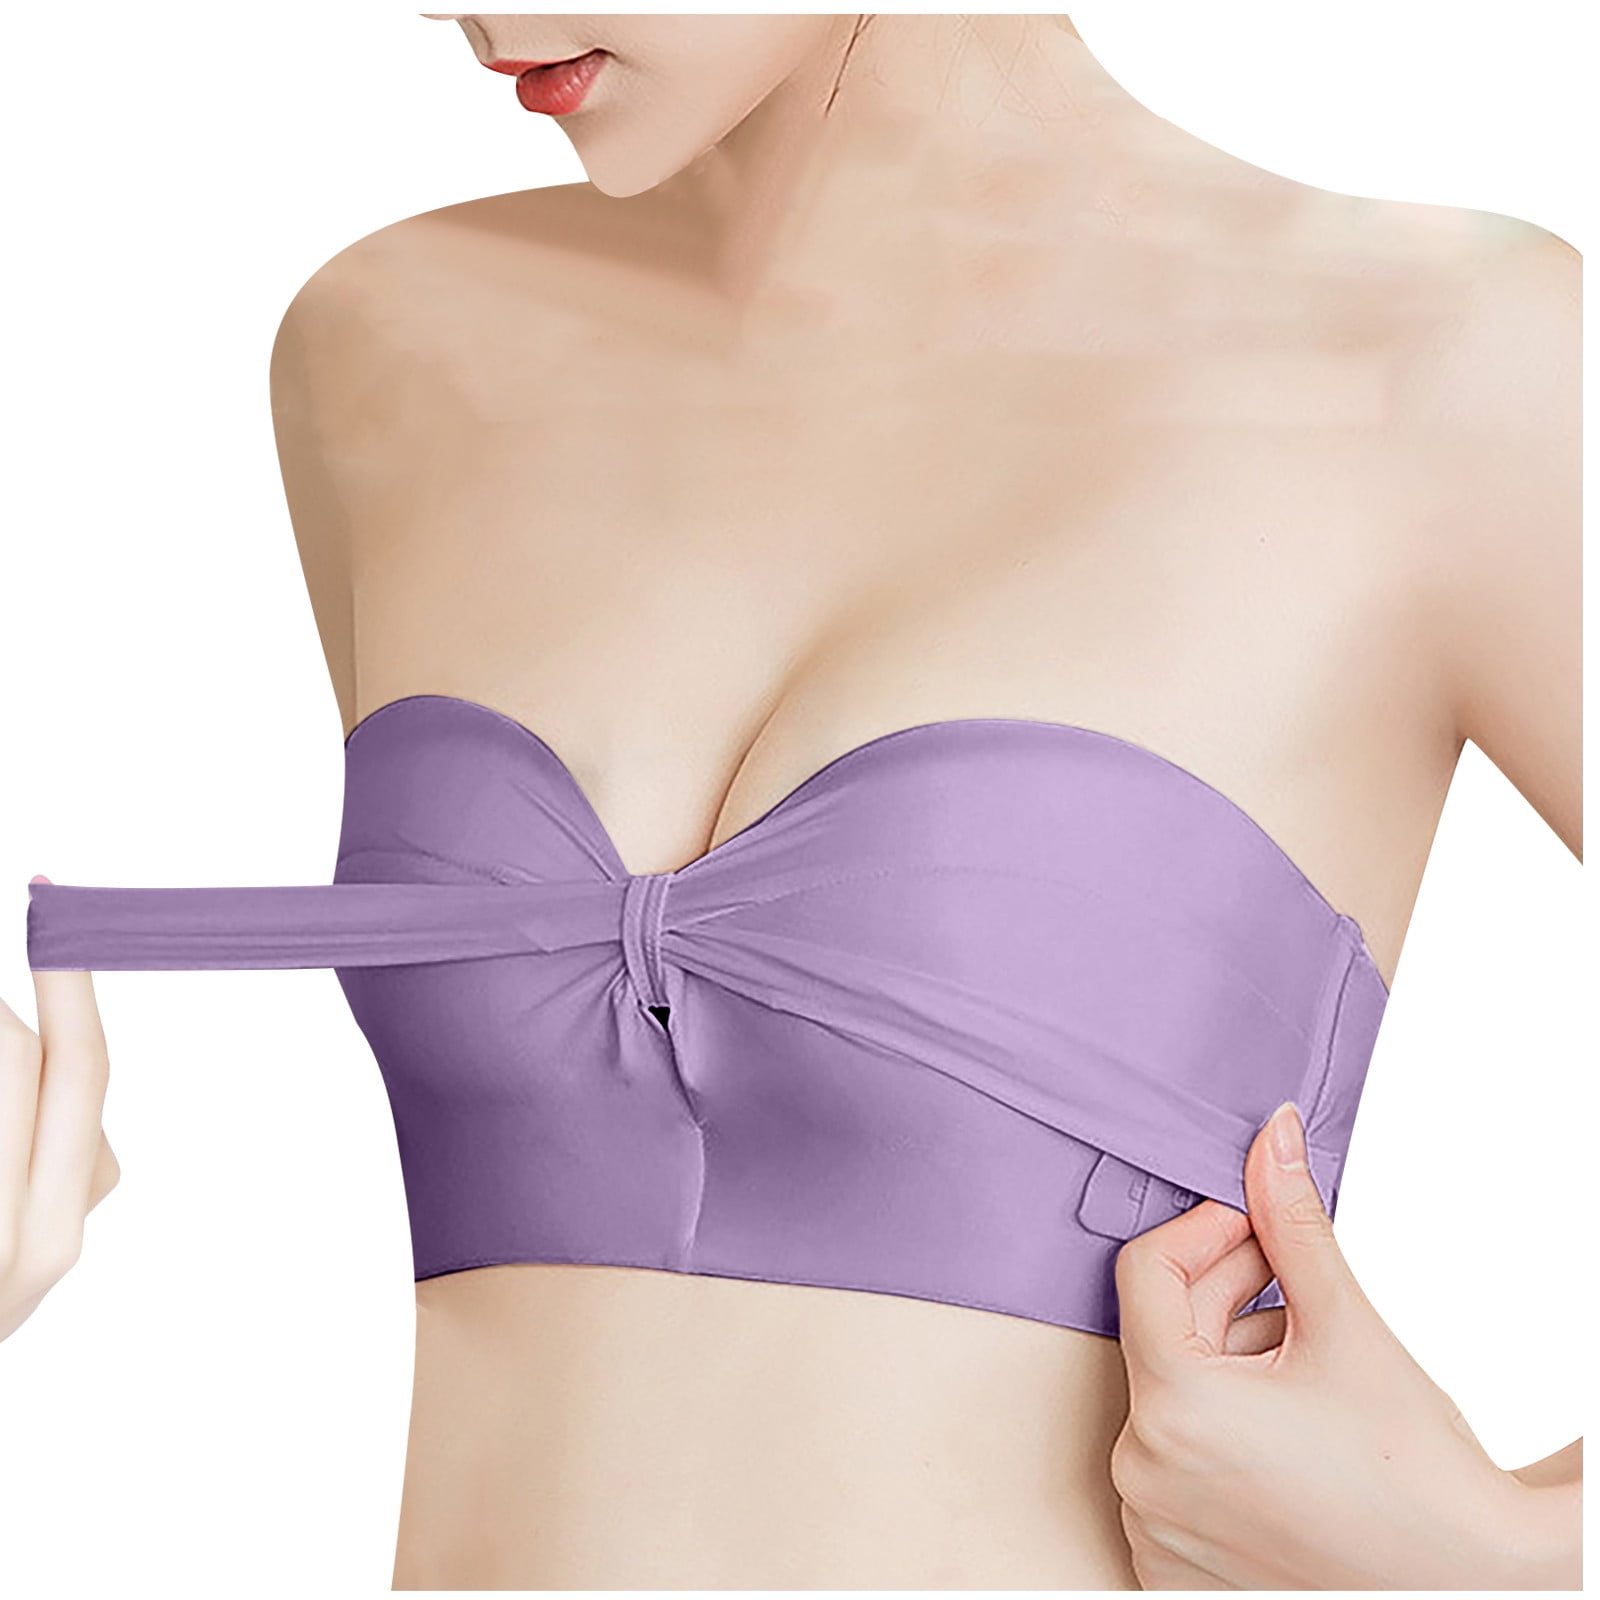 Lolmot Strapless Bras for Women Cross Front Buckle Wireless Push Up Lift  Invisible Bra Multiway Bandeau Bra with Removable Straps 